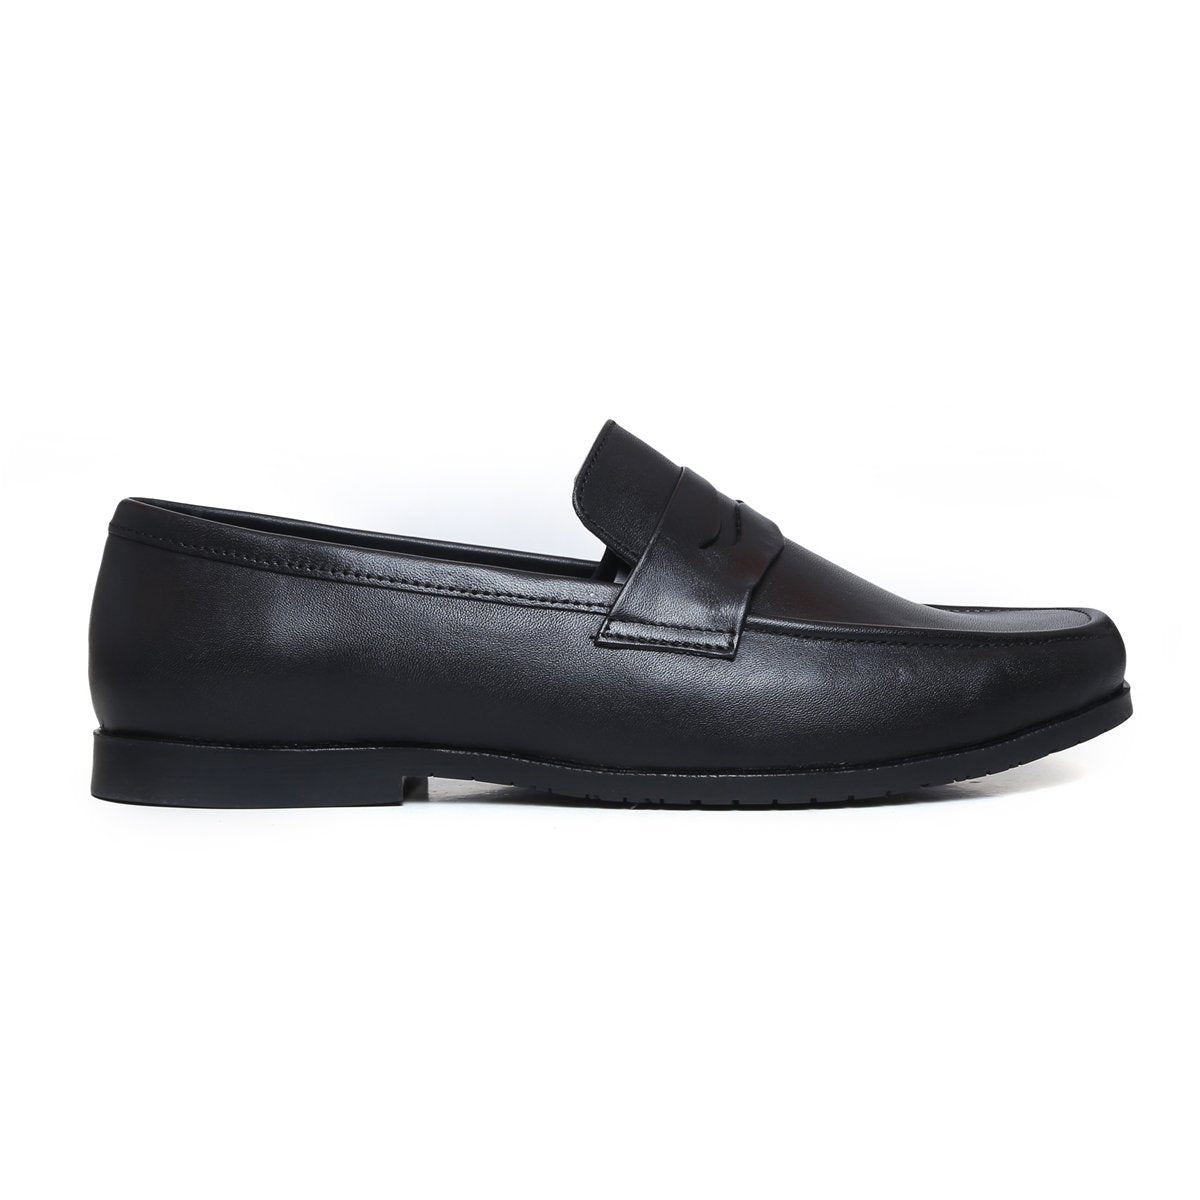 leather loafer shoes_ZS6